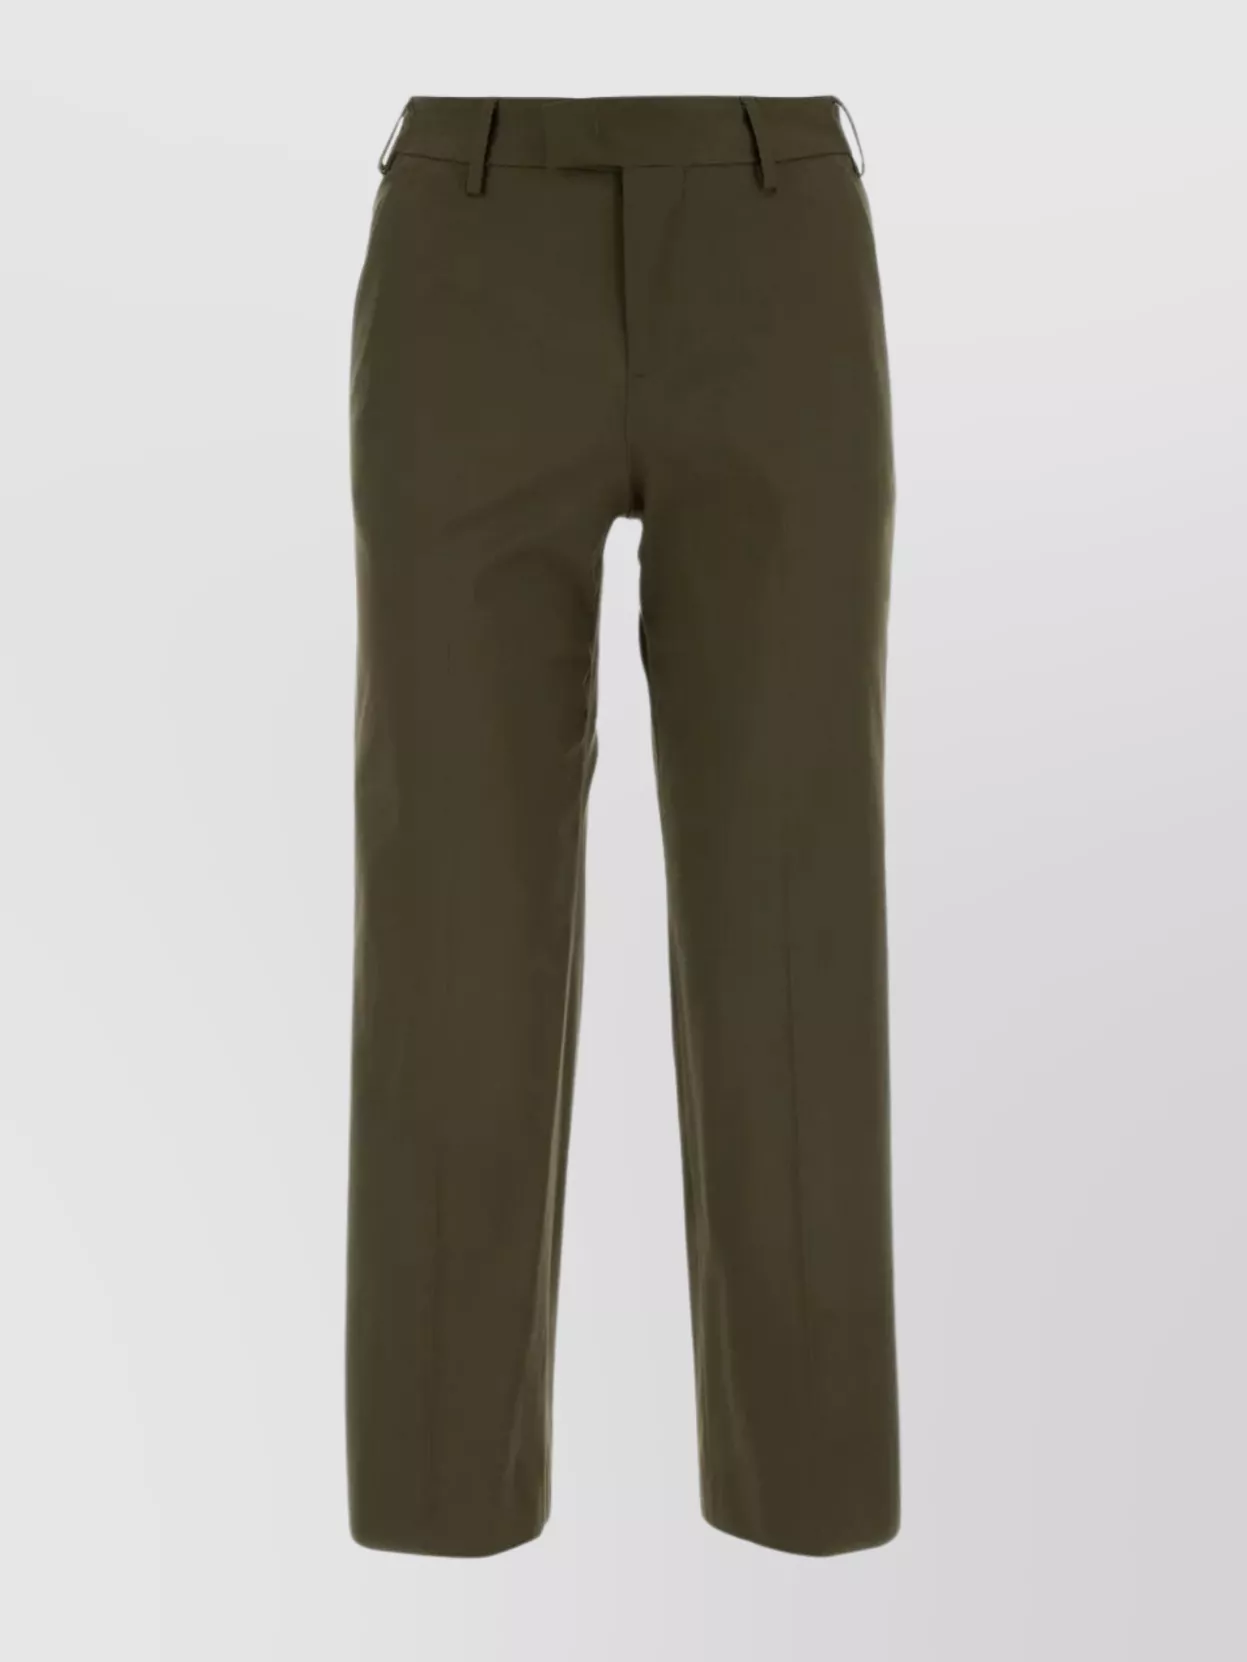 Shop Pt Torino Central Pleated Stretch Cotton Pant